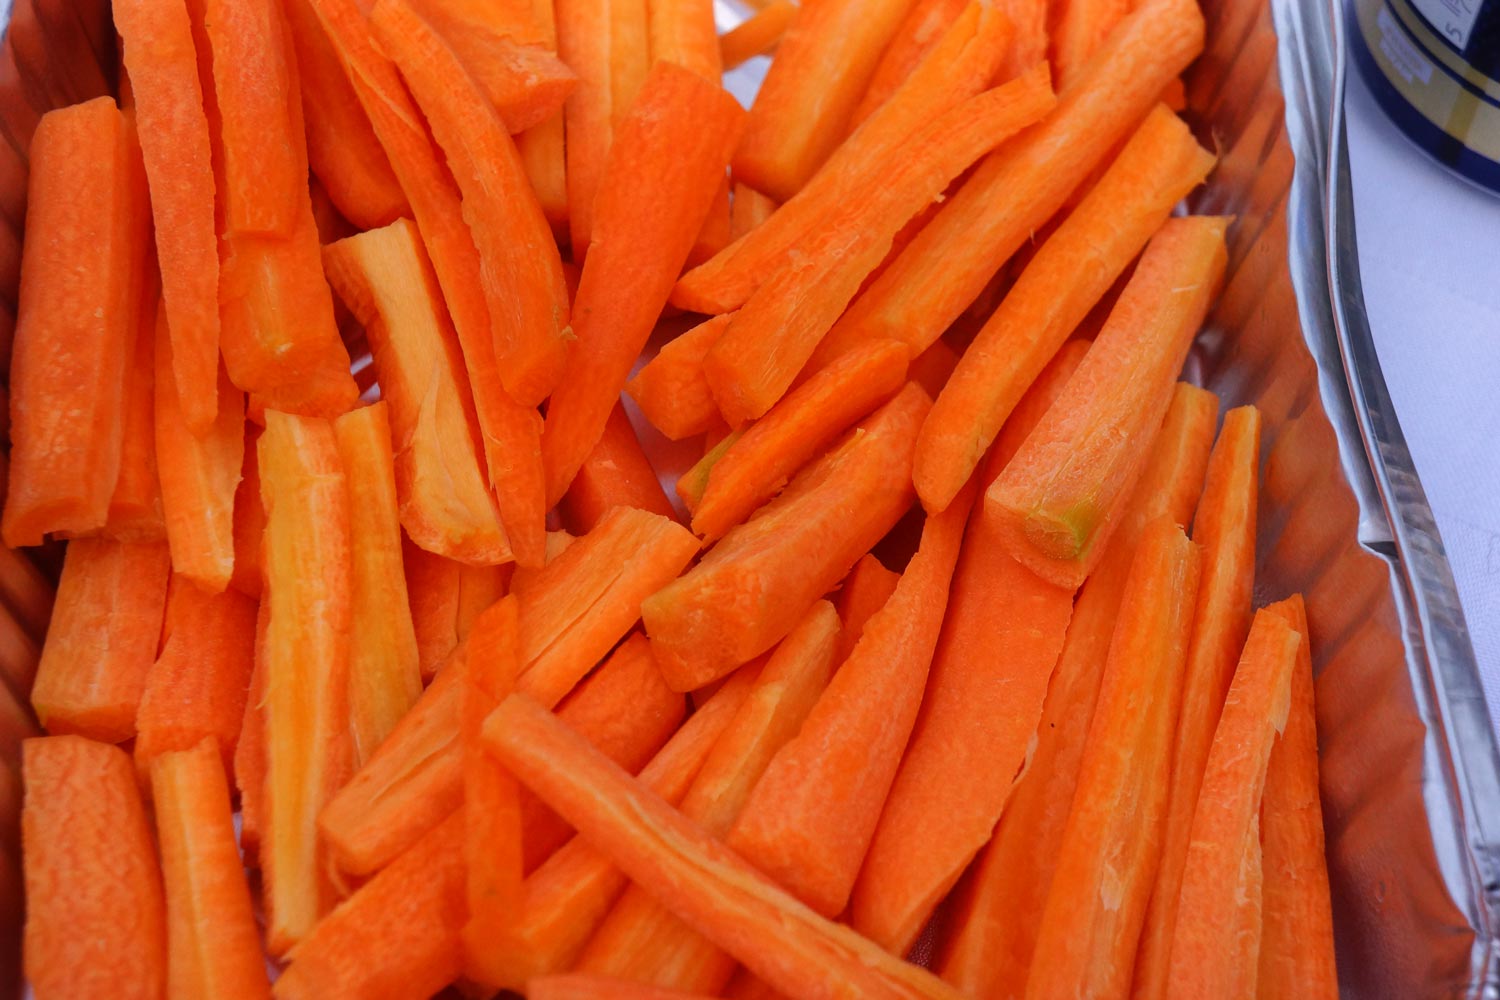 Carrots for the after run party in Venice